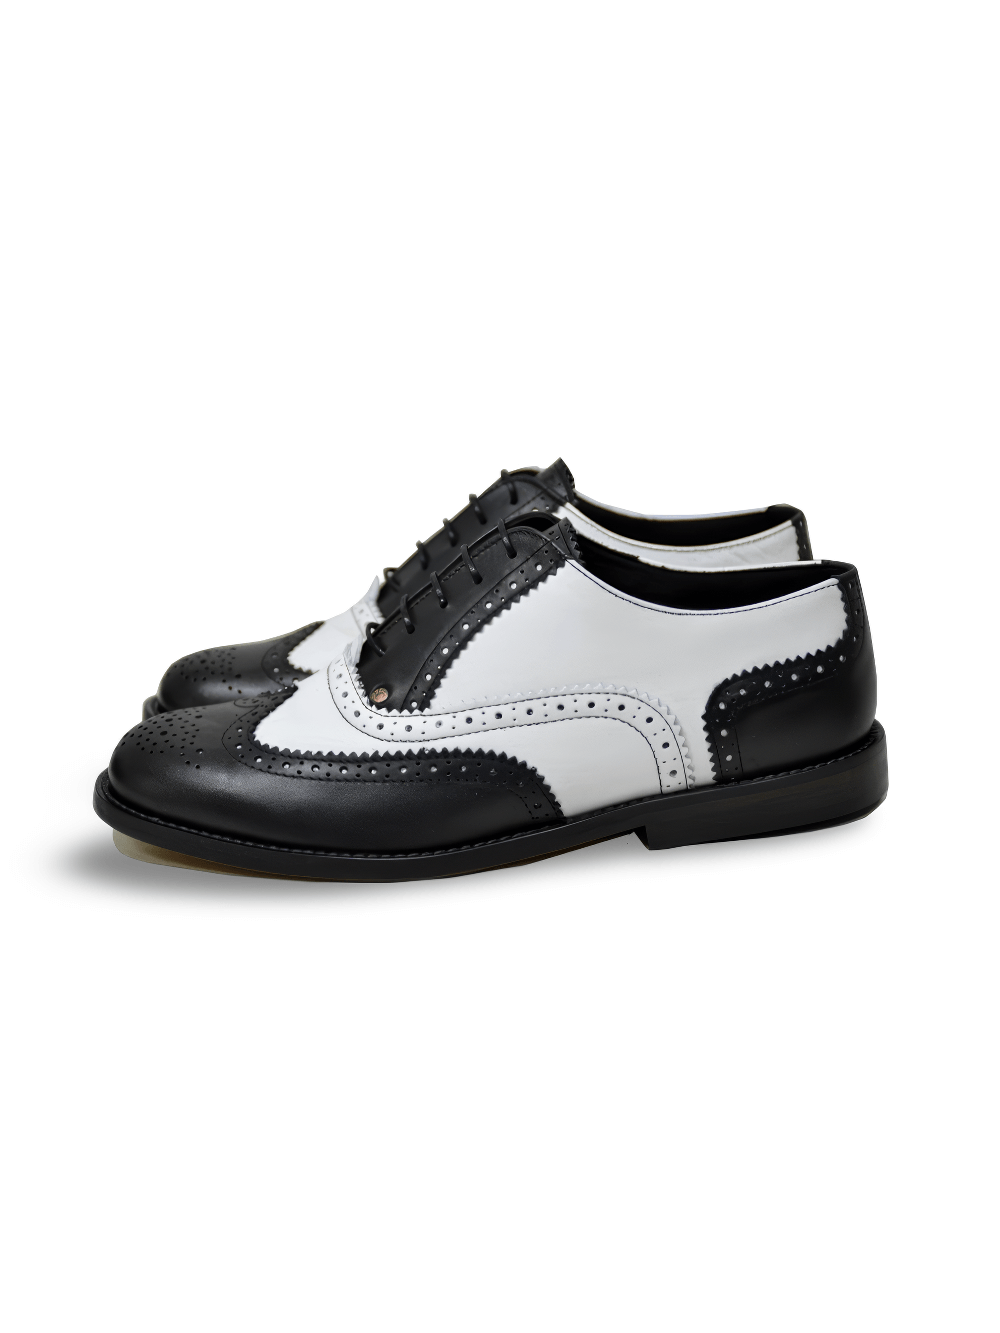 Men's Rockabilly Leather Oxford Shoes in Two-Tone